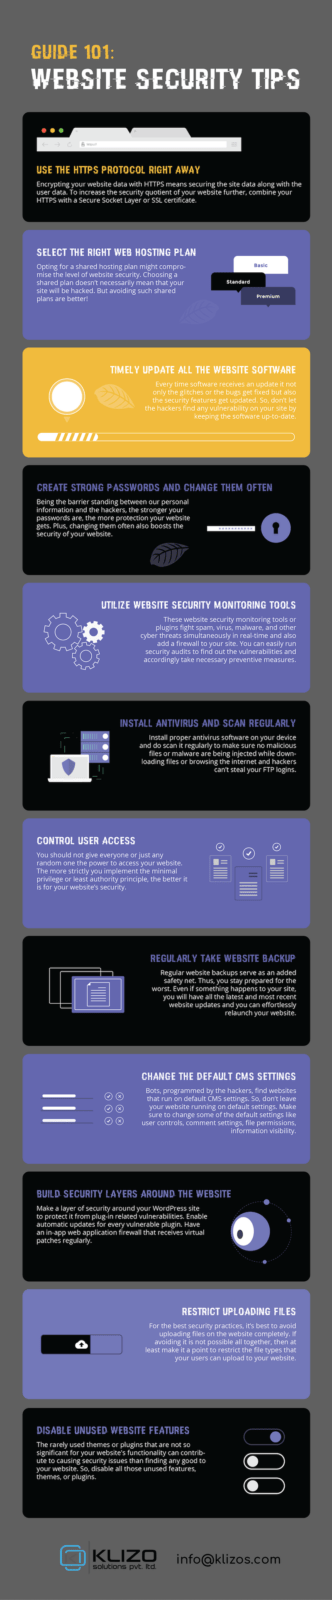 Website Security Tips infographic